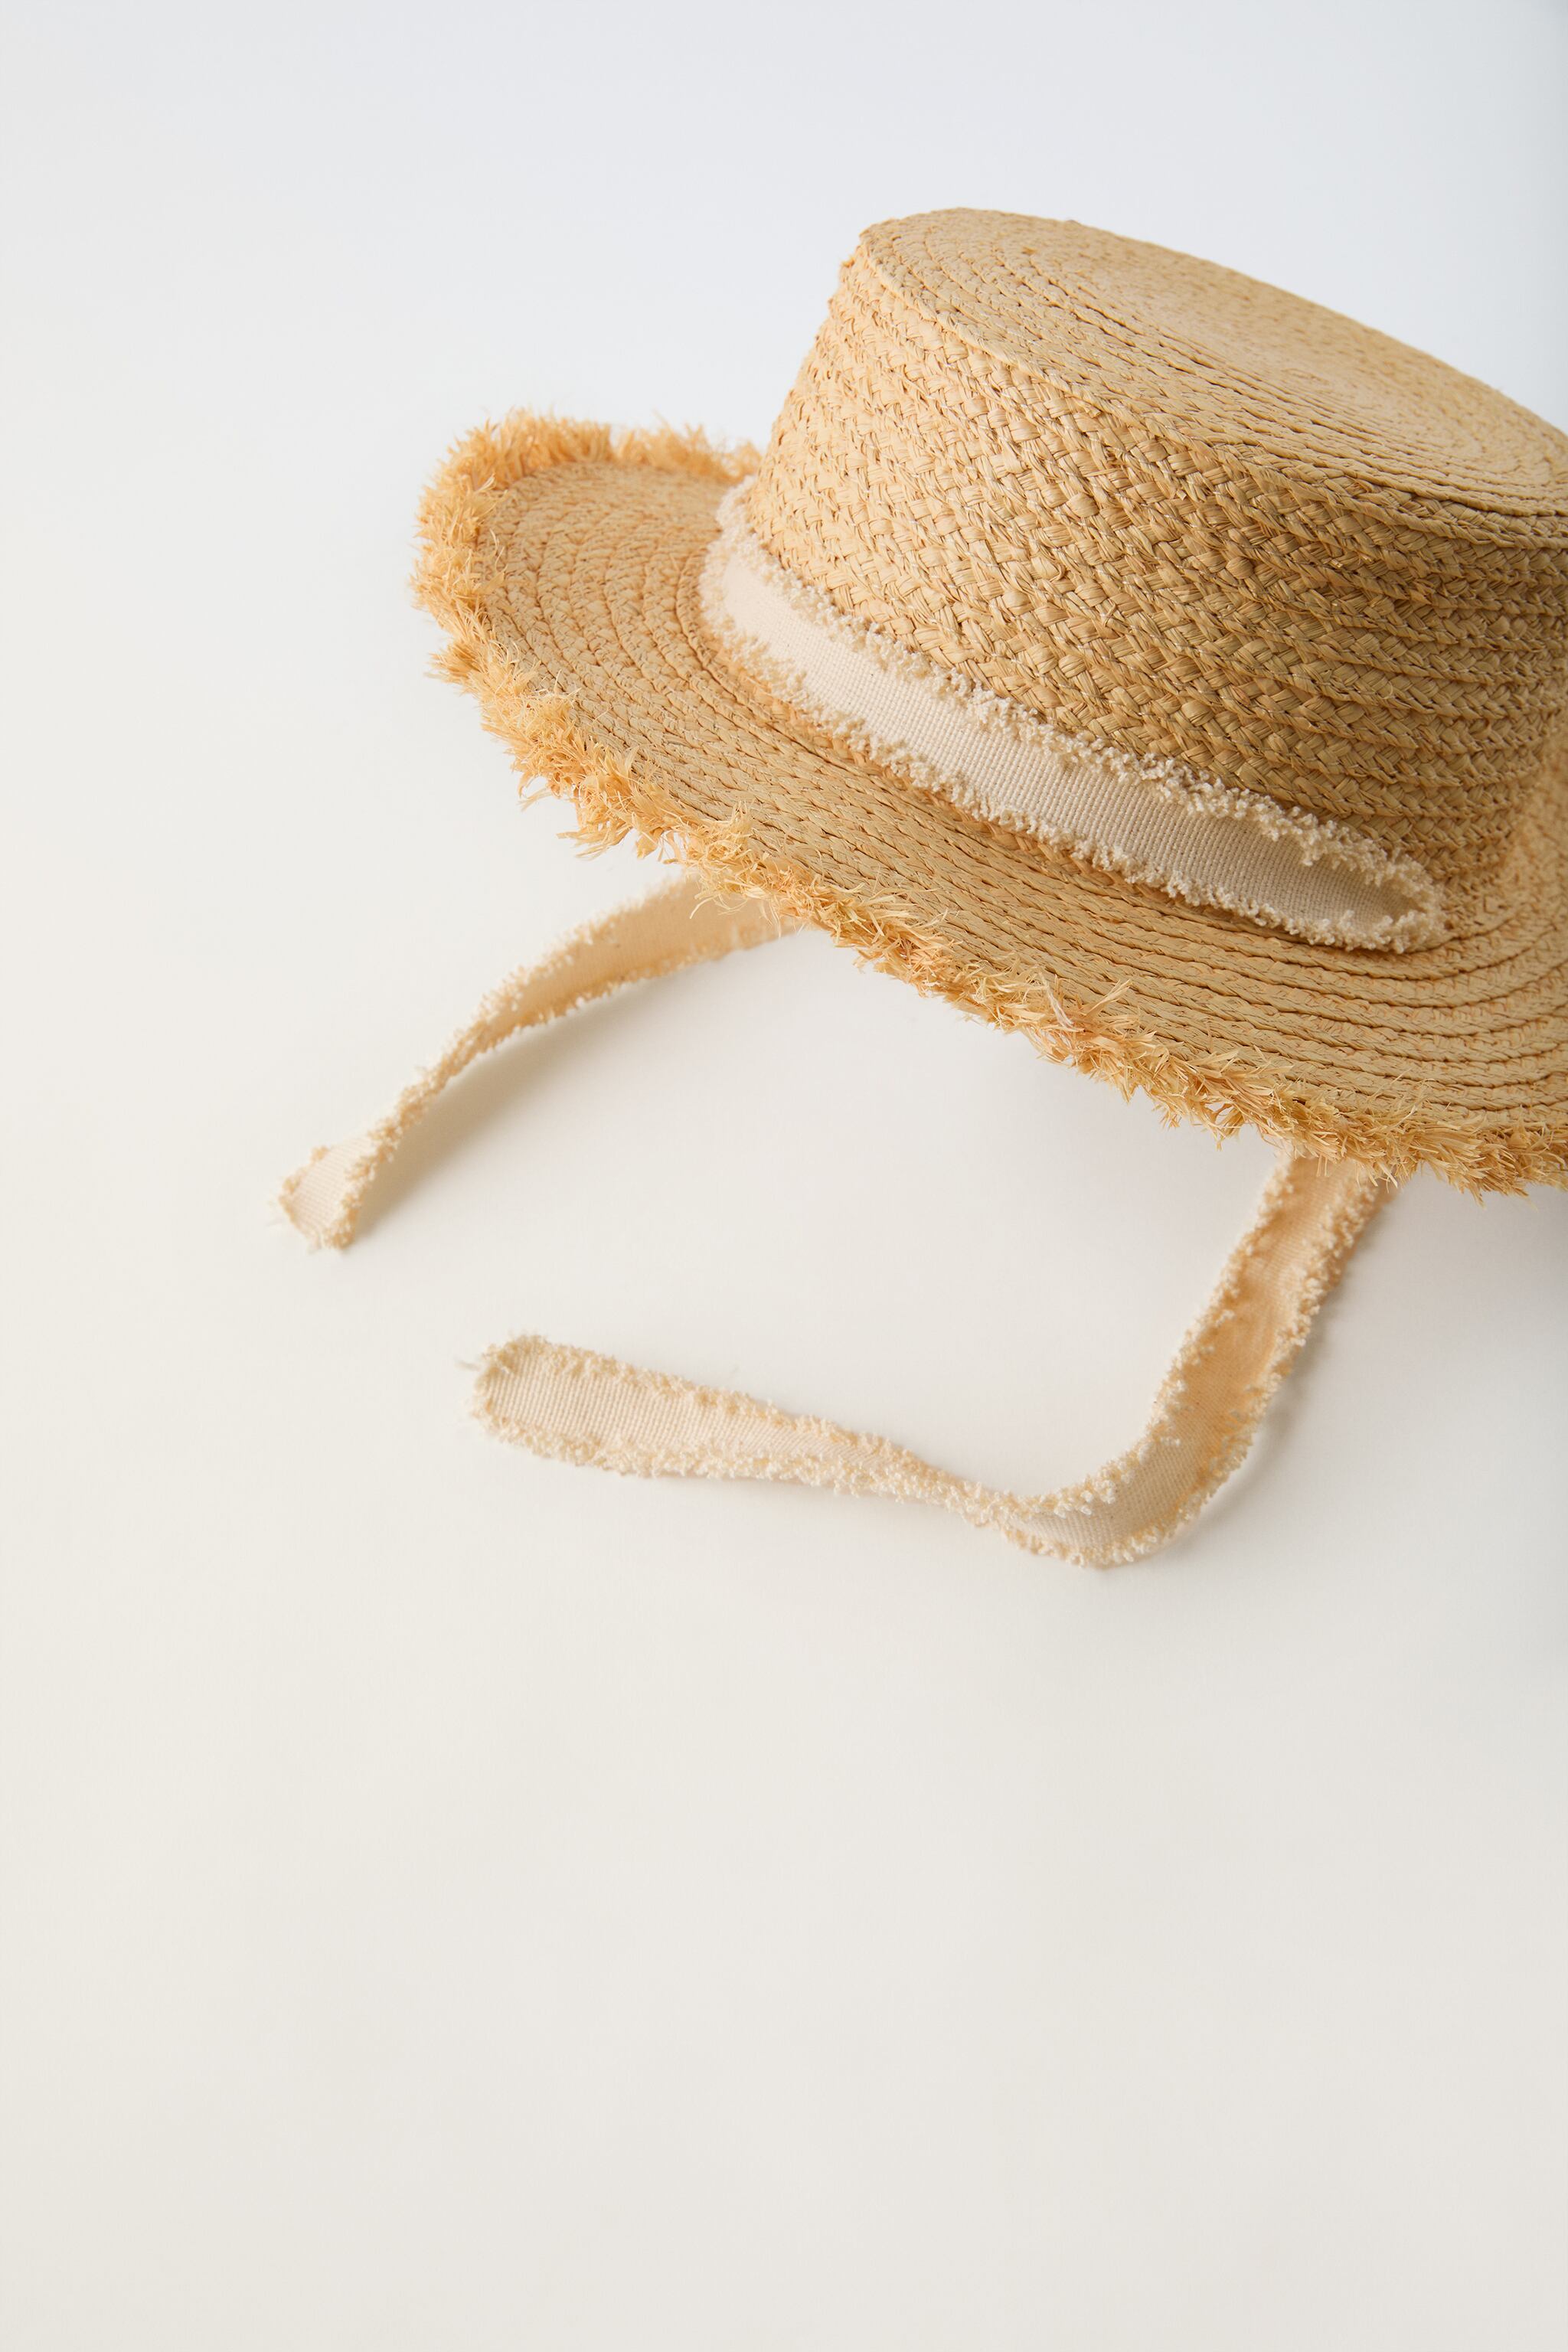 TIED BOATER HAT